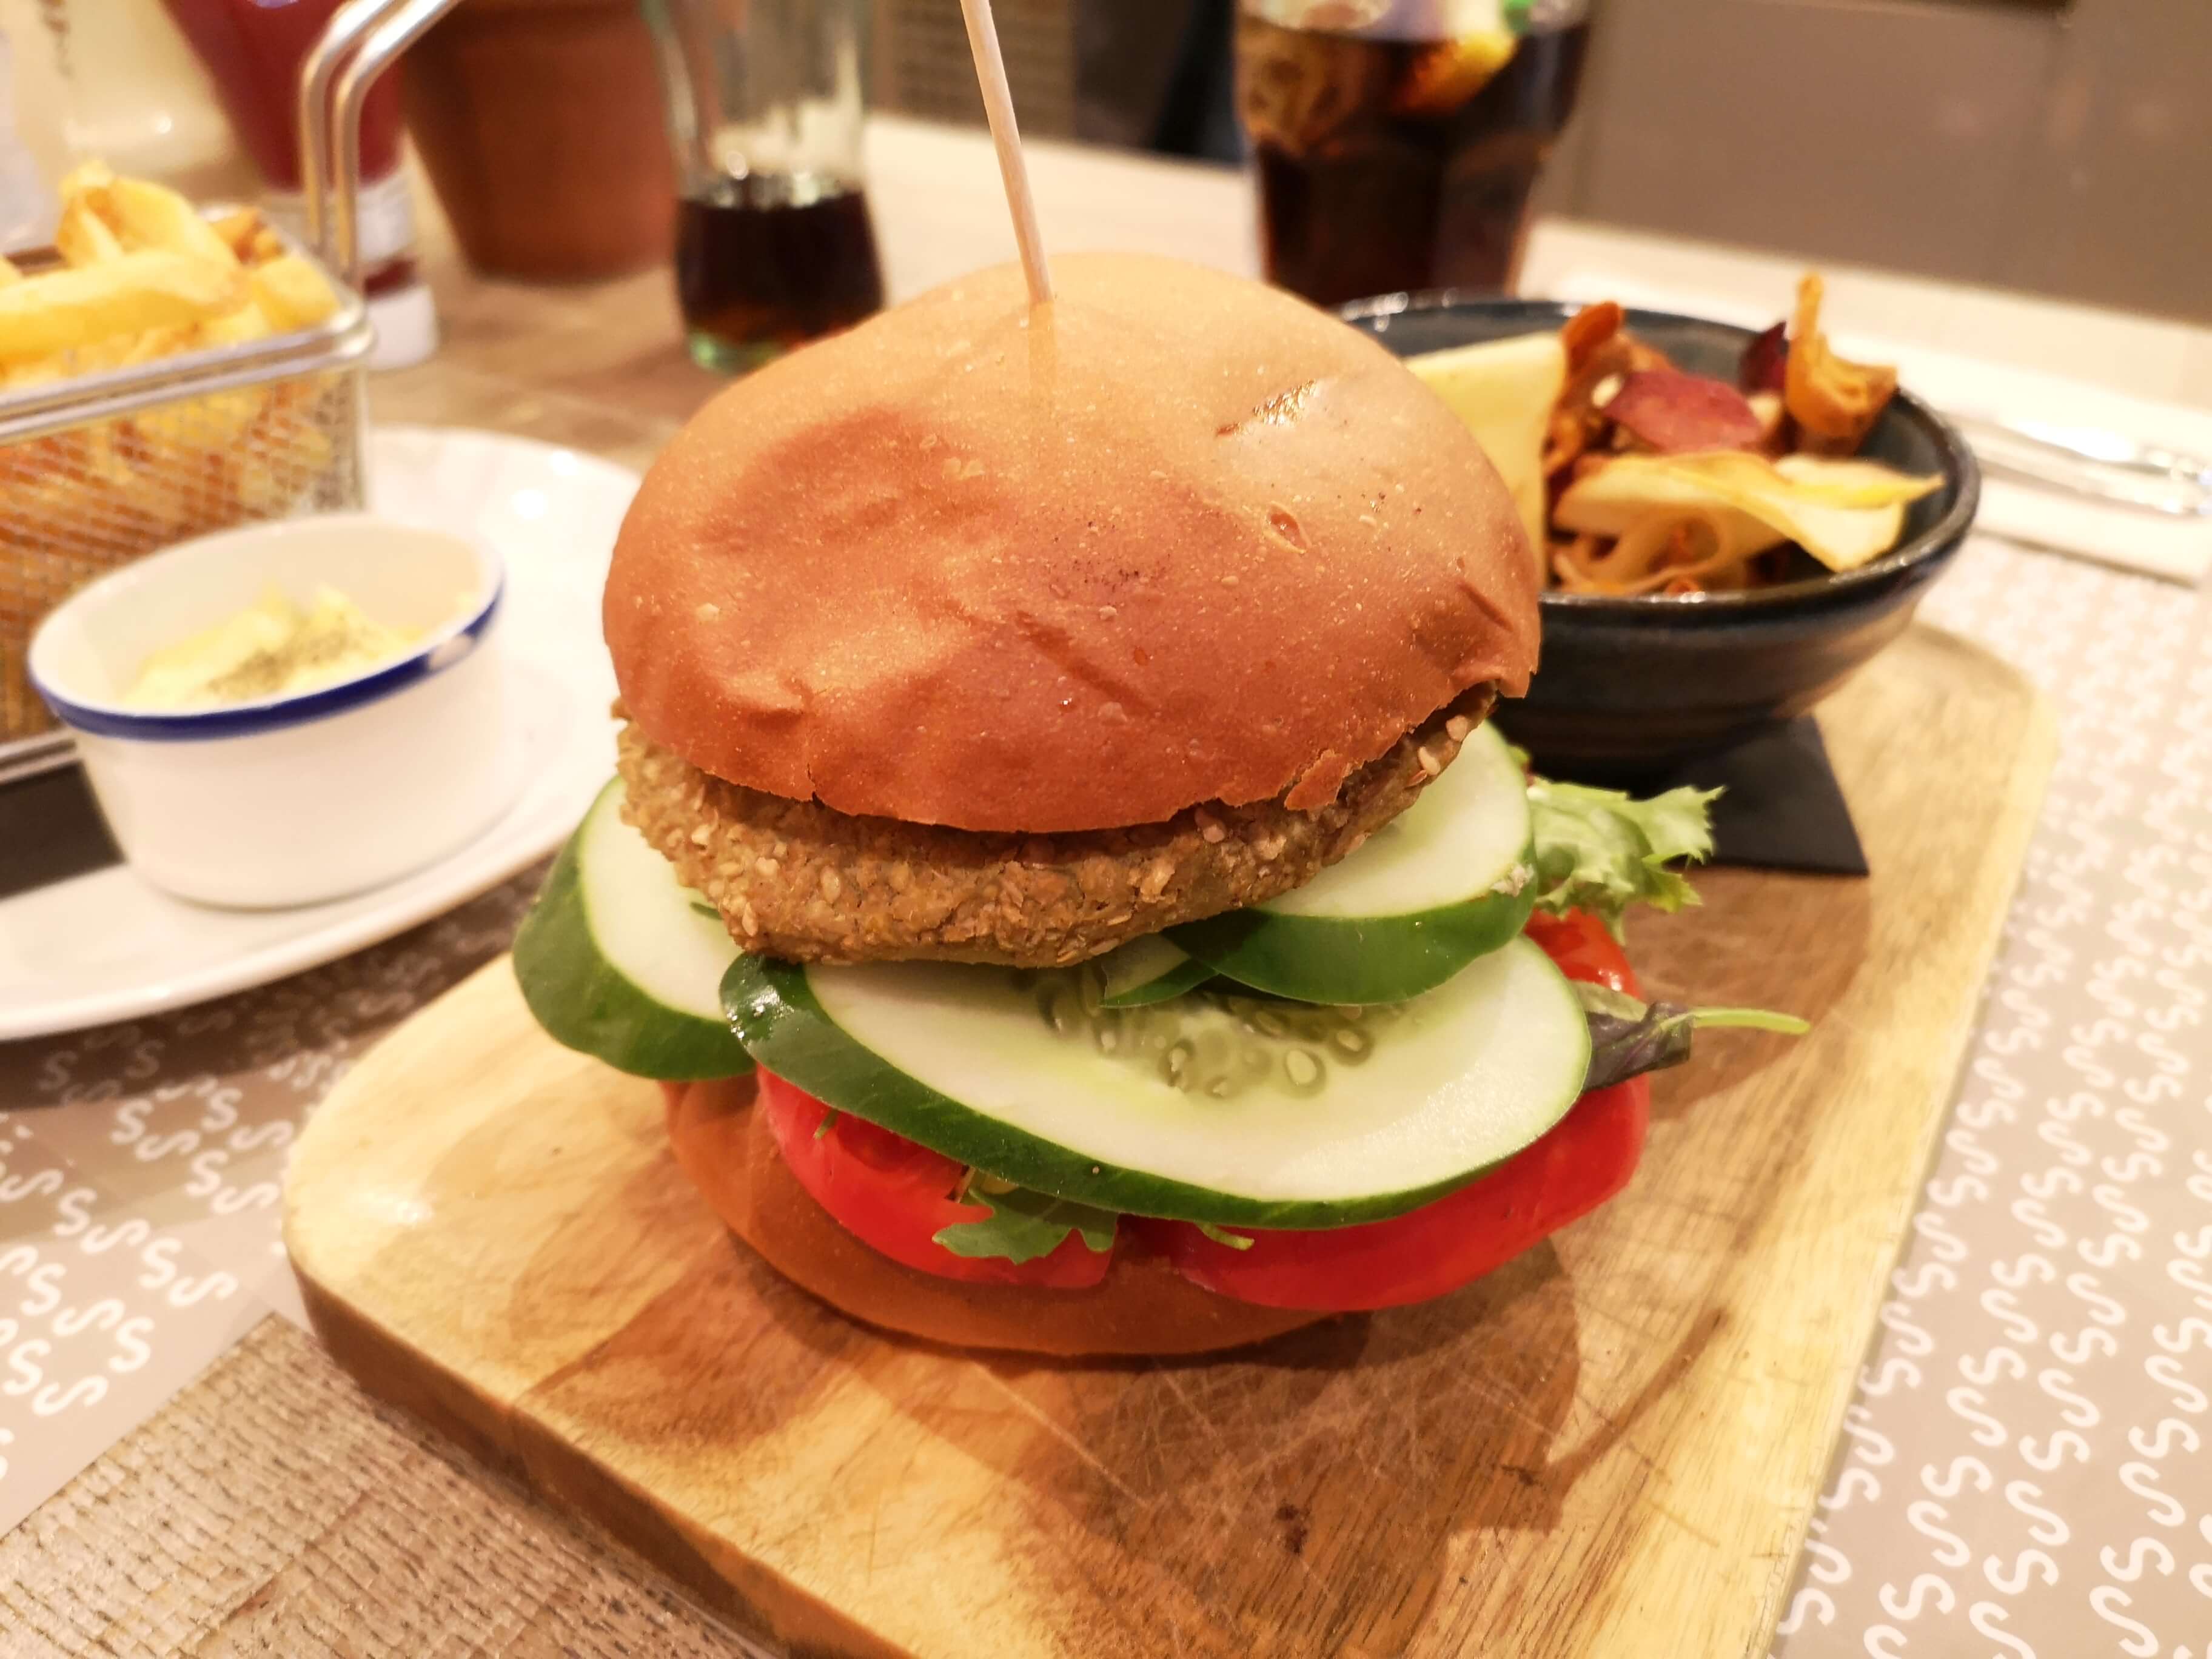 A vegan burger with huge slices of cucumber and tomatoes from Restaurant Singular.